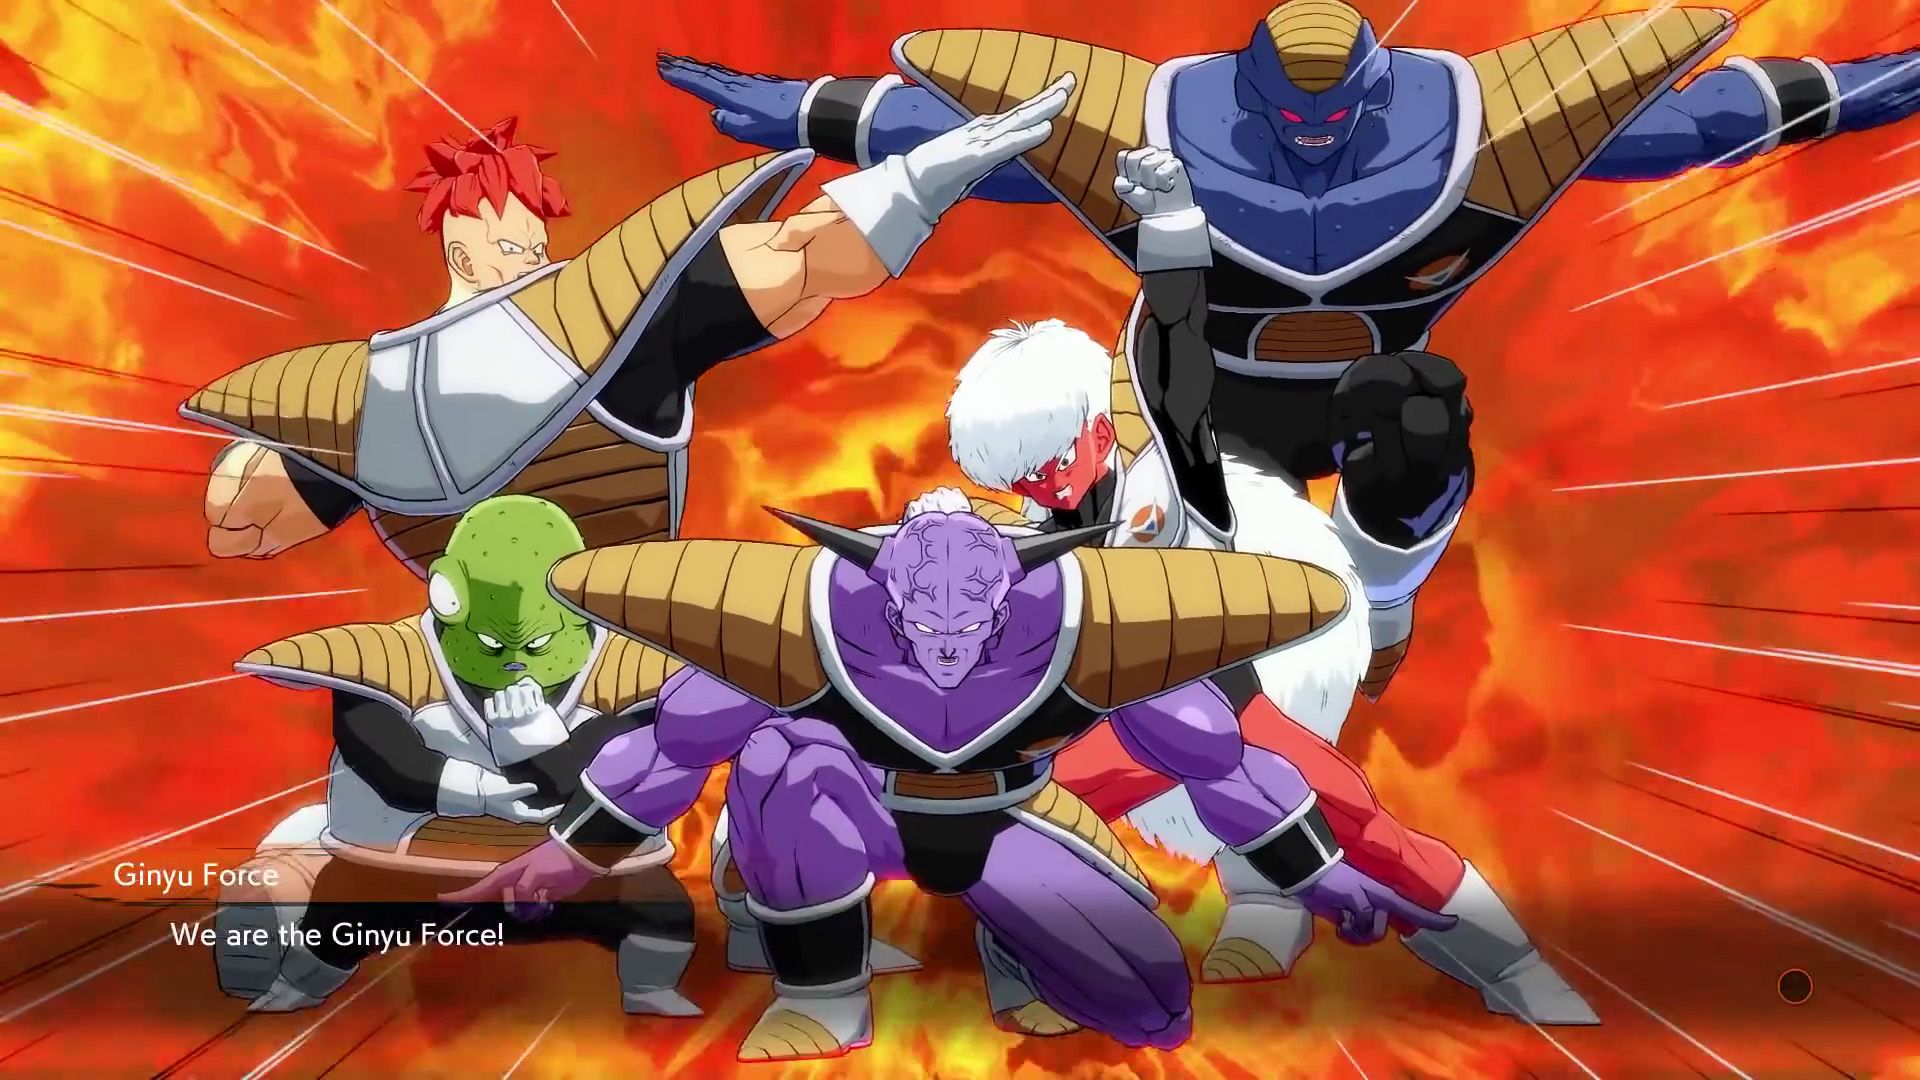 Special Fighting Pose Captain Ginyu